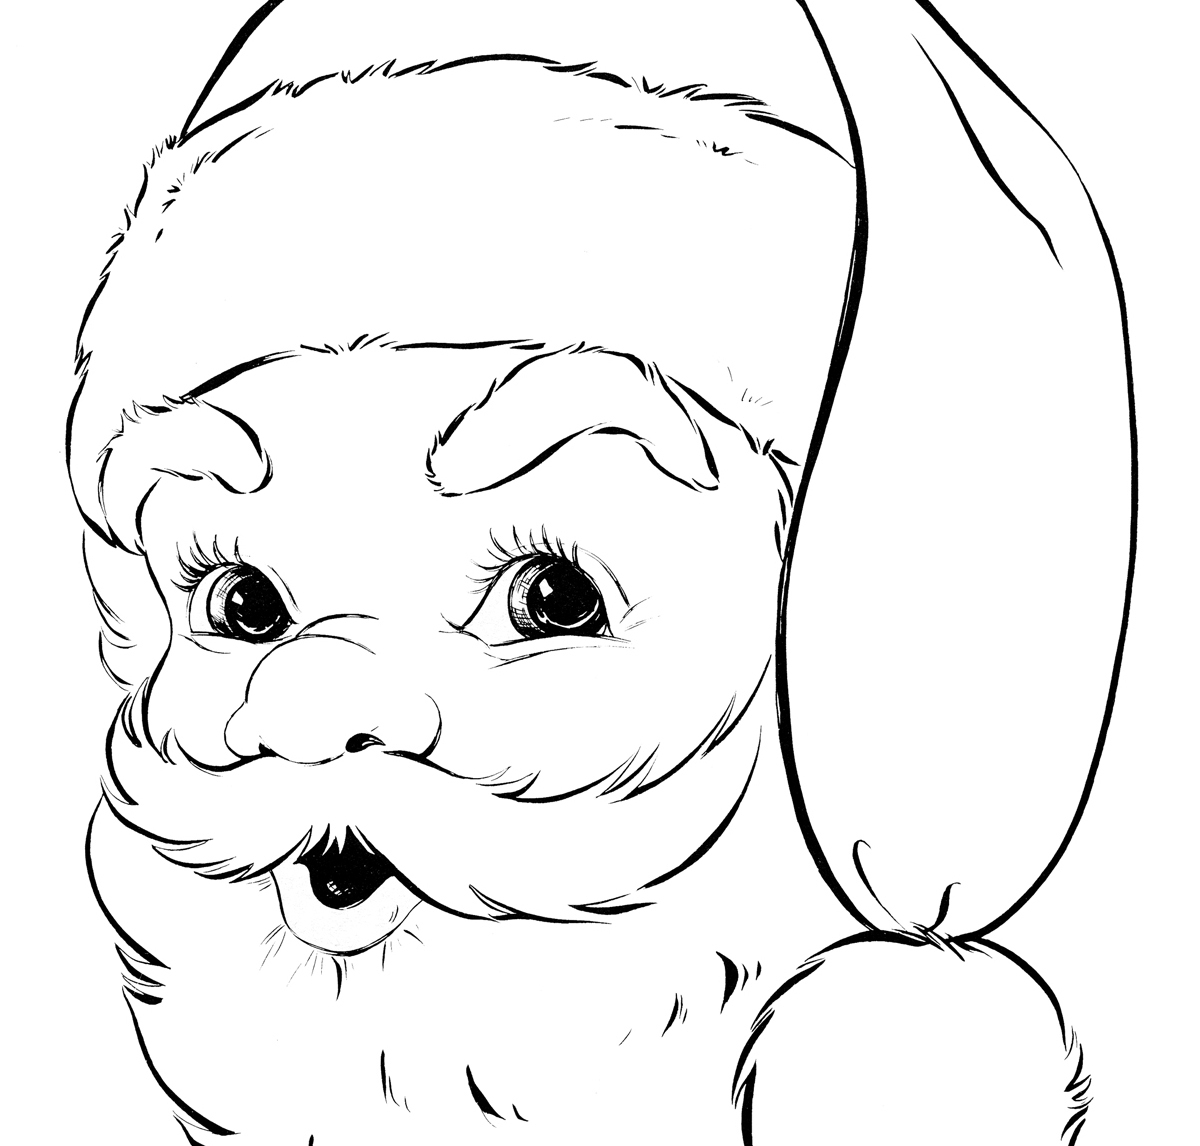 20 Free Christmas Coloring Pages! - The Graphics Fairy - Free Full Size Printable Christmas Coloring Pages